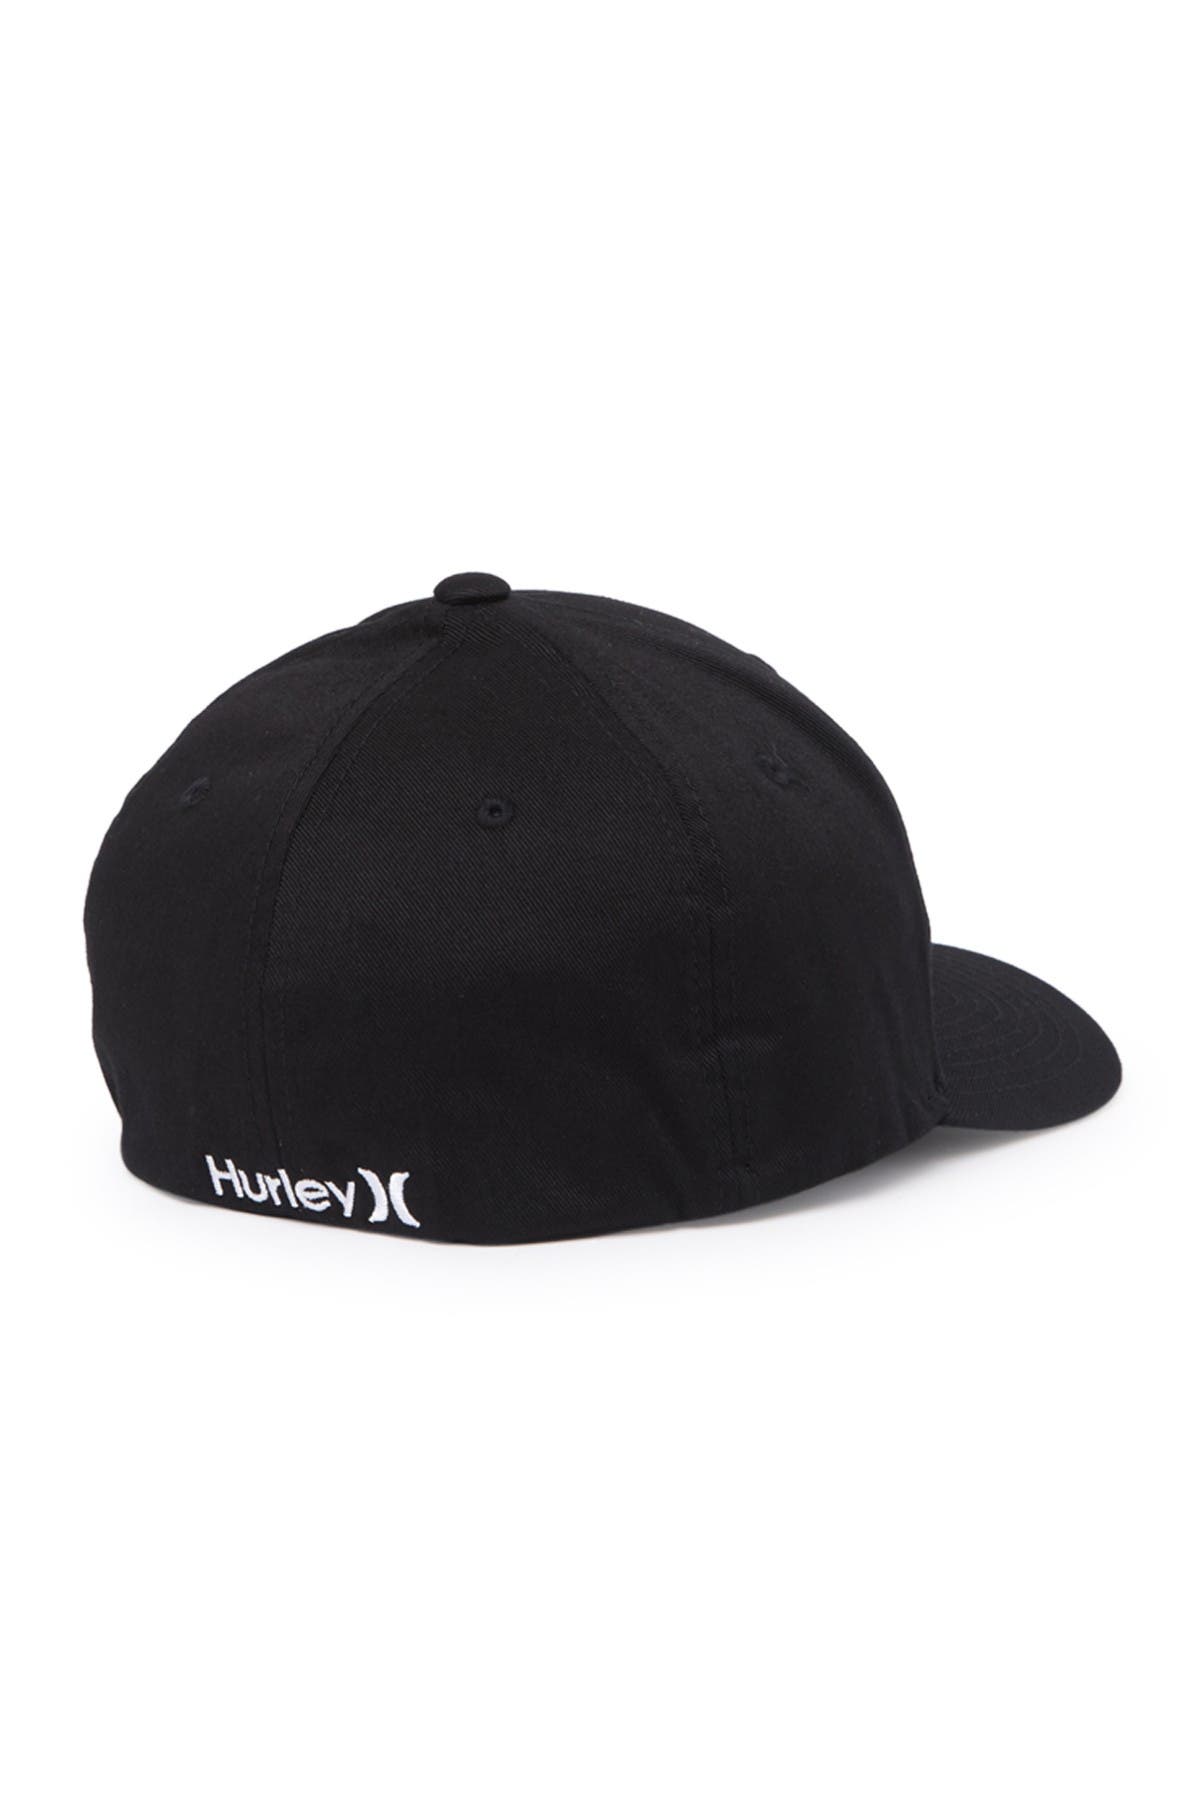 Hurley One And Only Baseball Cap In Charcoal